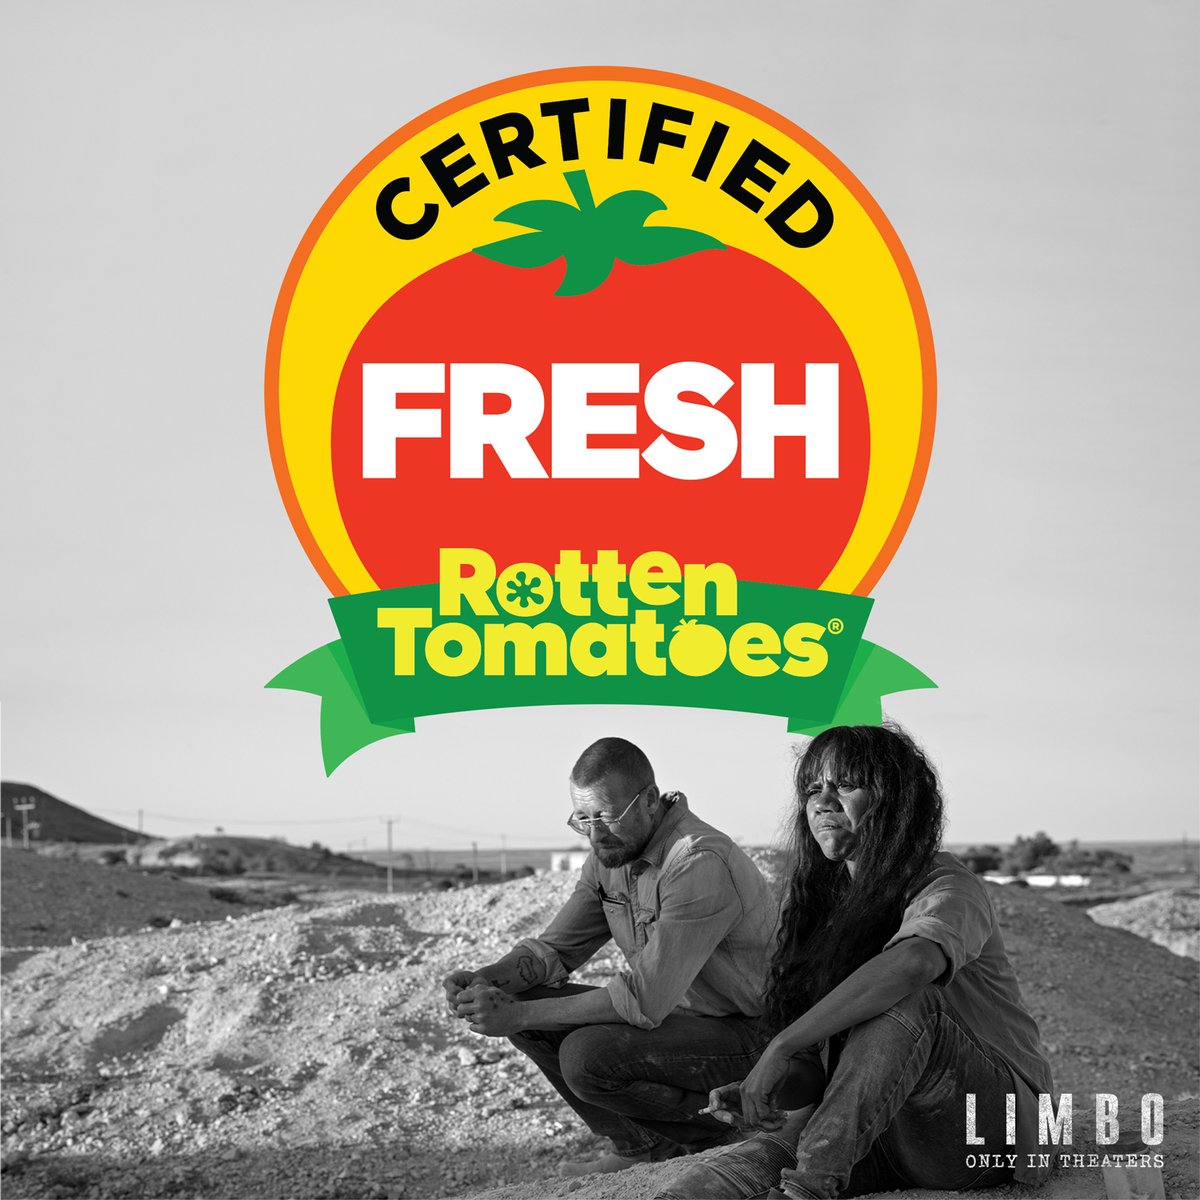 In the remote outback town of LIMBO, some cold cases are warming up. #NowPlaying only in select theaters. #CertifiedFresh